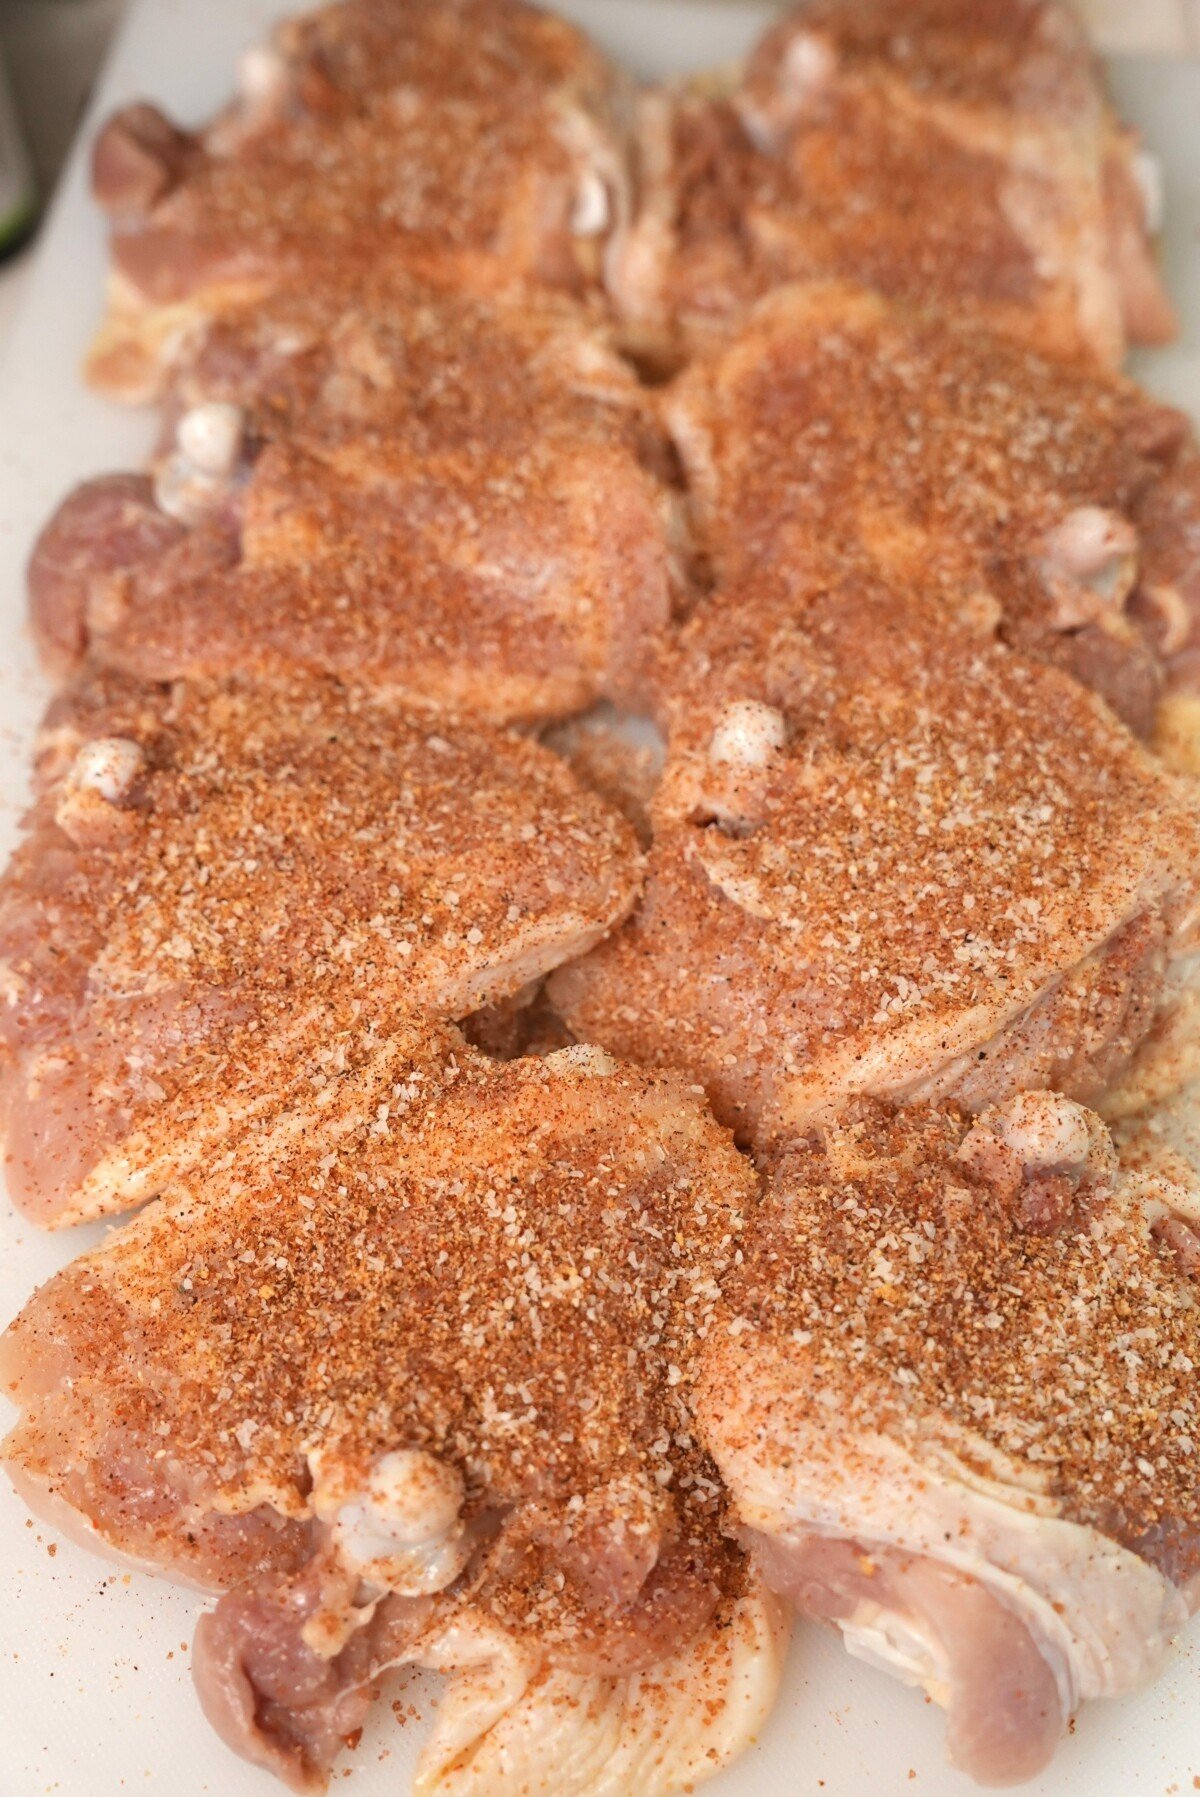 The meat side of the chicken thighs seasoned on a cutting board.